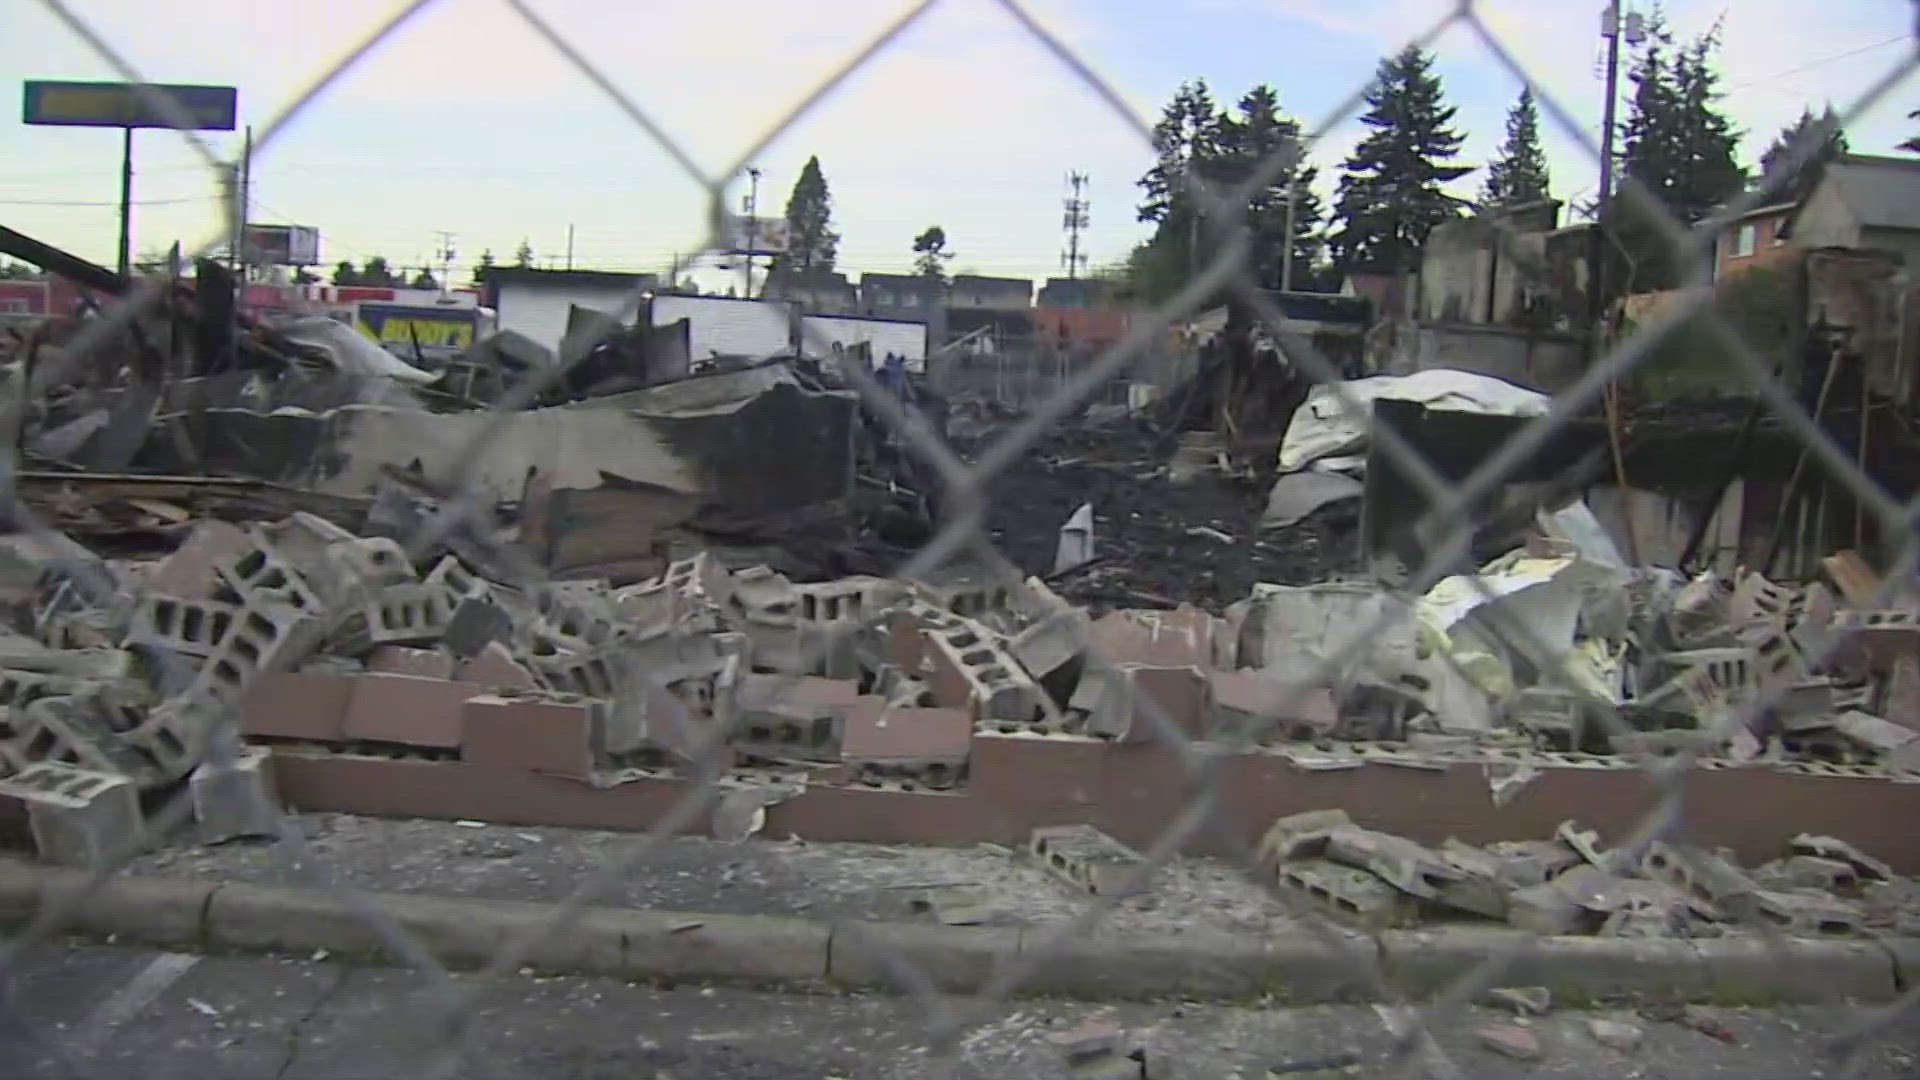 Buddy's Home Furnishings was reduced to ashes after a fire broke out in the building Tuesday morning.